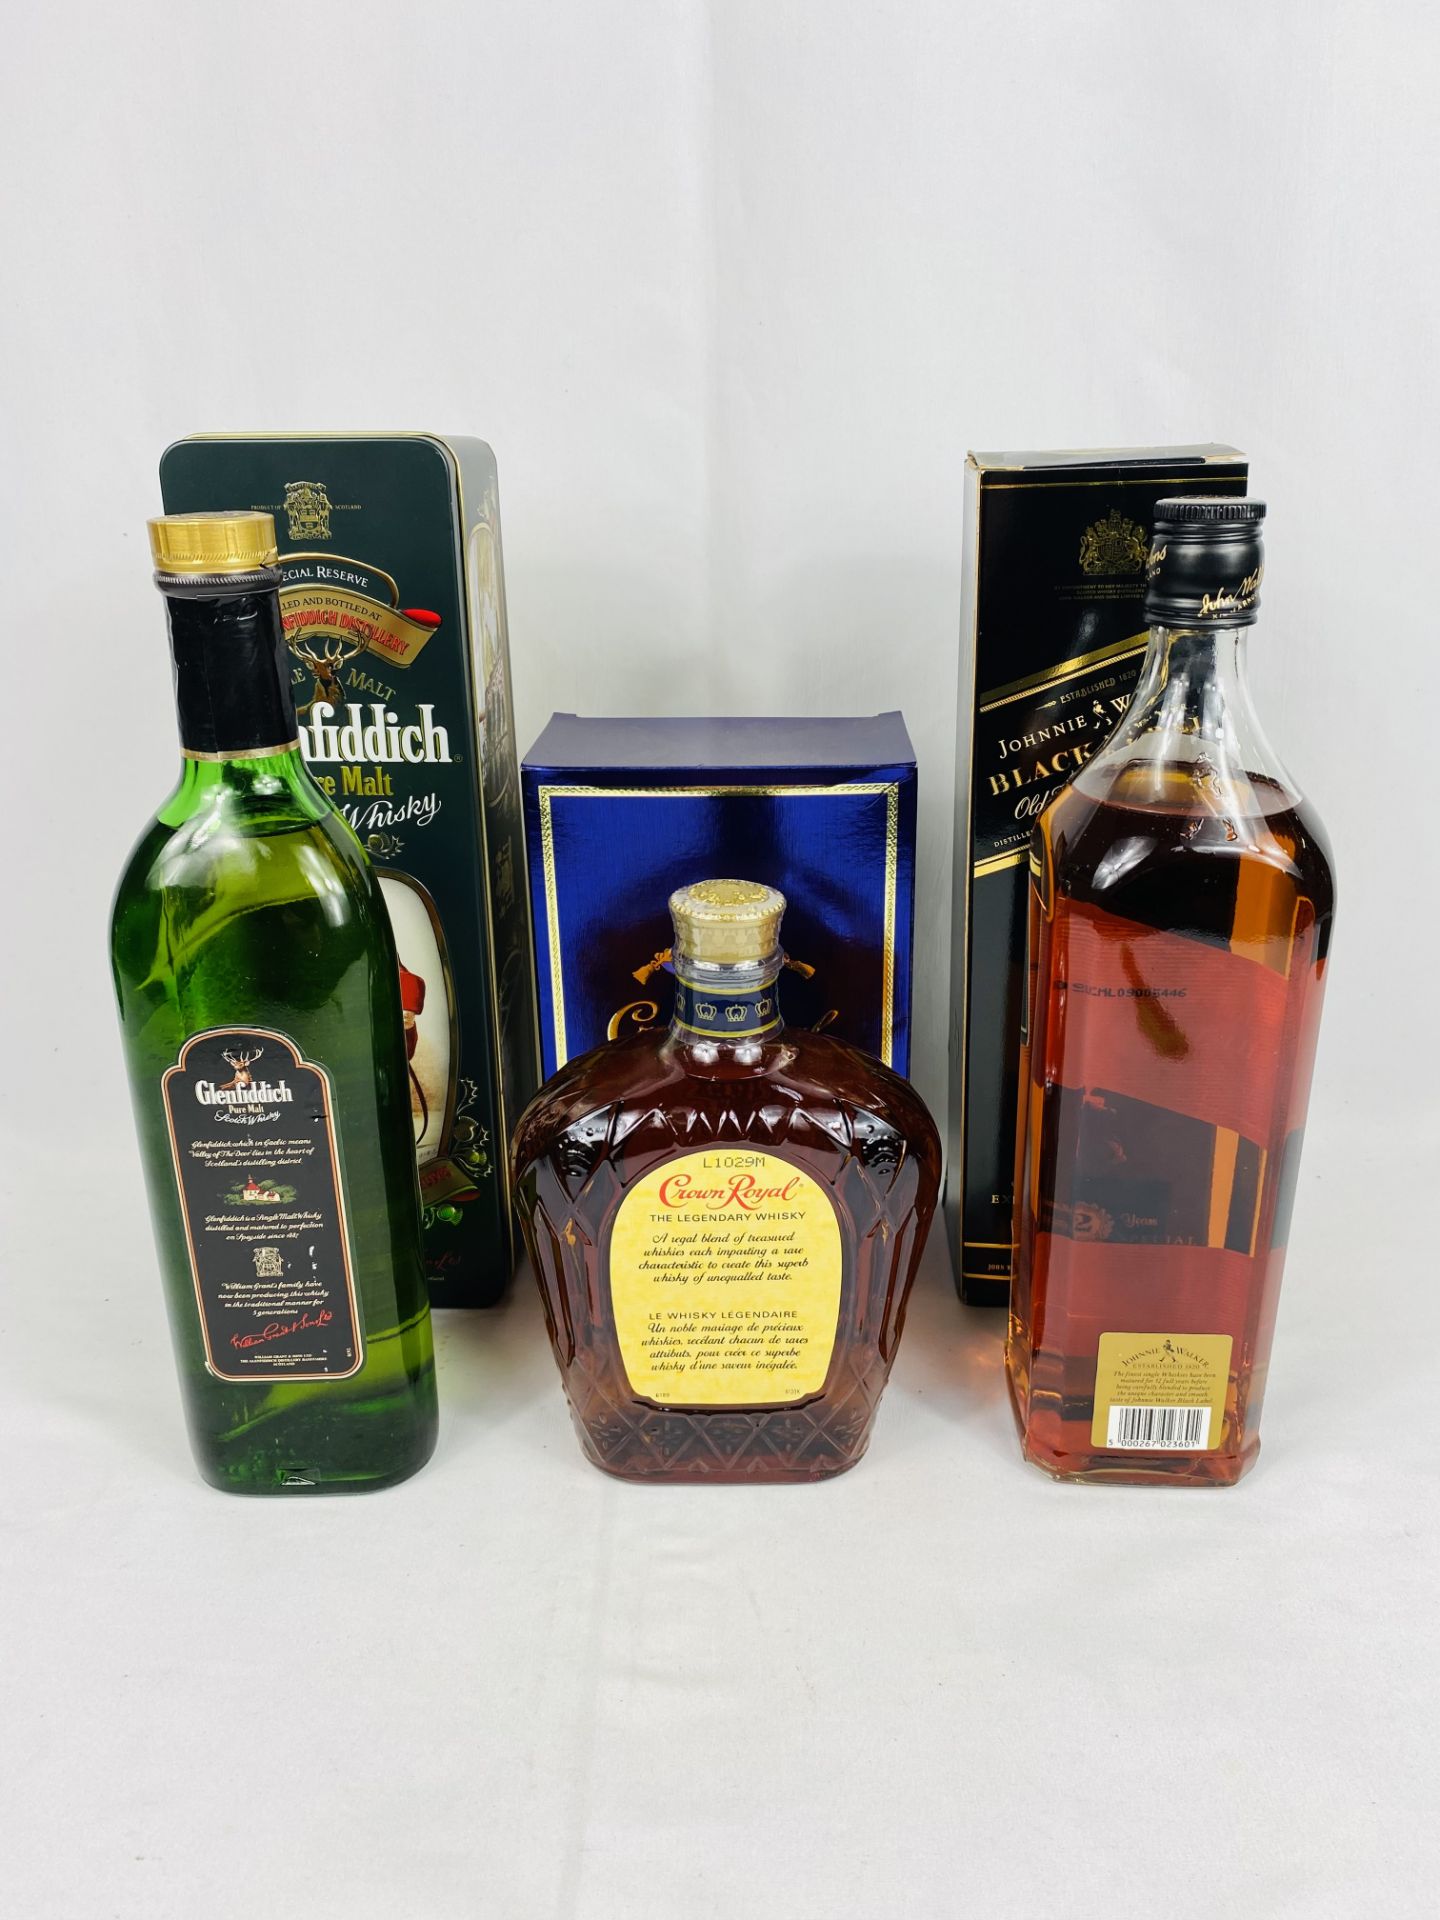 A bottle of Glenfiddich Scotch whisky and two other bottles of whisky - Image 2 of 3